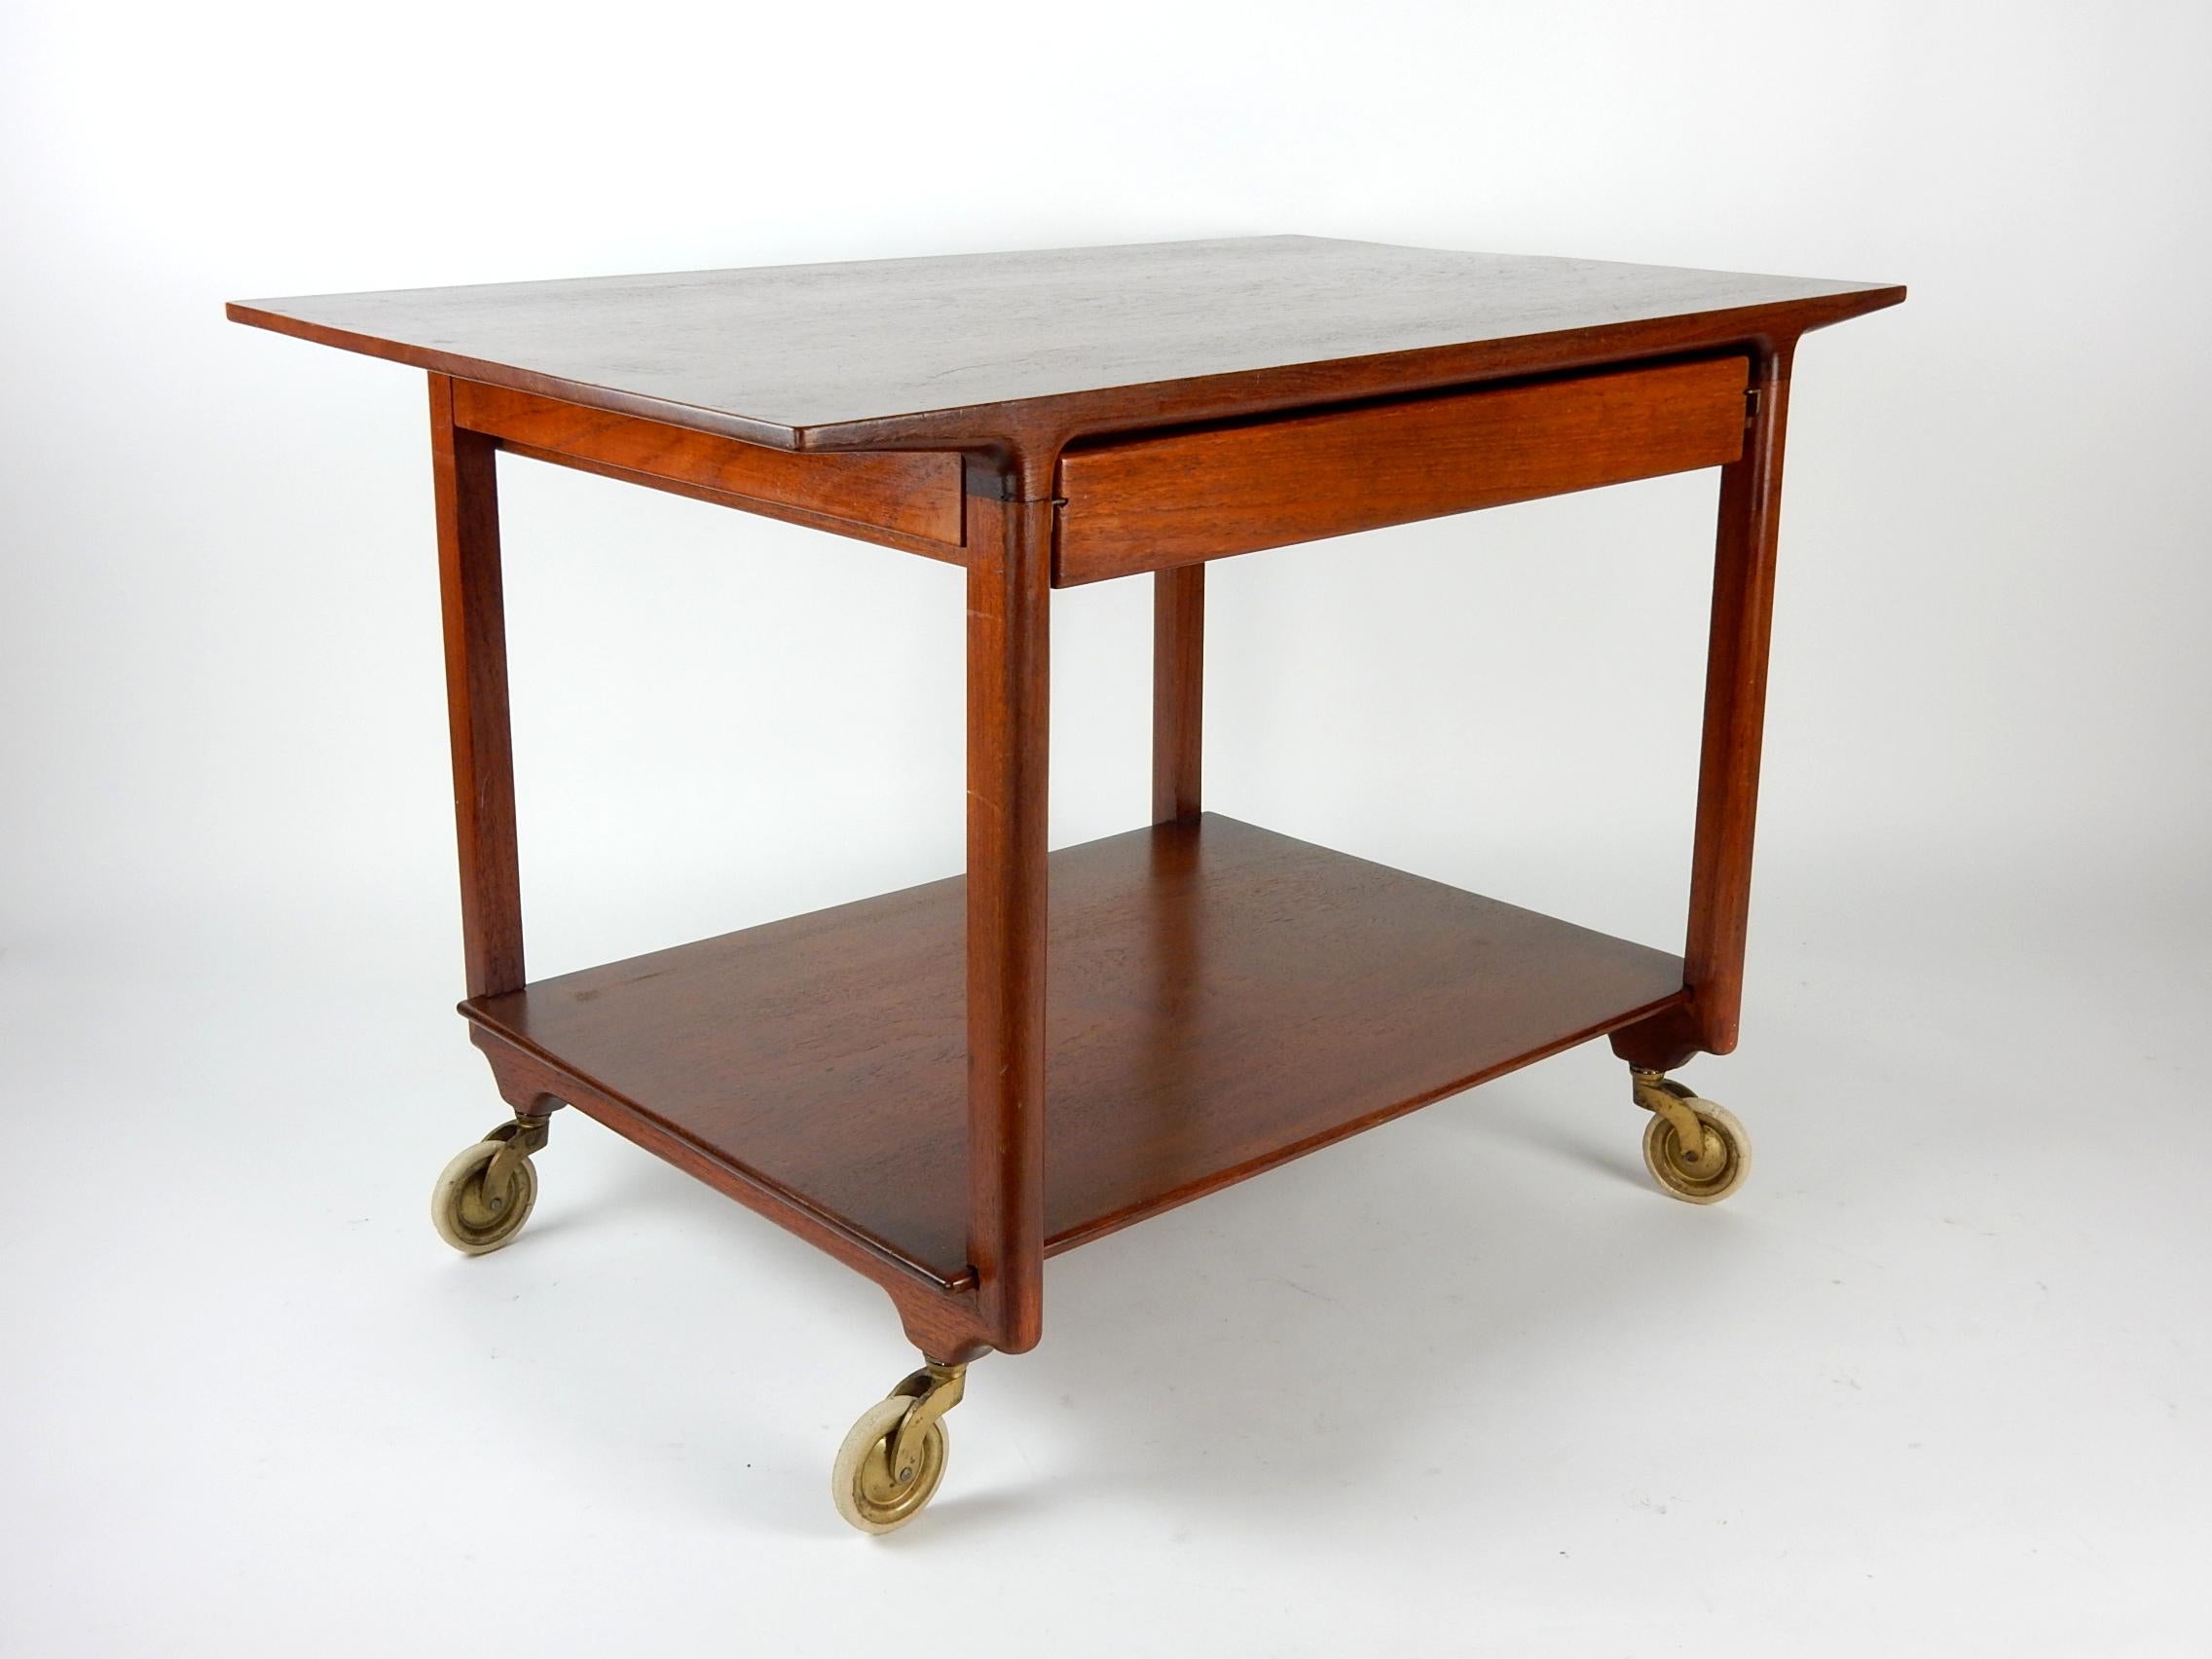 Simplistic midcentury Danish service cart from Thorald Madsens.
Attributed to designers Edvard and Tove Kindt-Larsen.
Sold teak with 2 sided drawers. Brass casters with white rubber wheels.
Thorald Madsens plate inside drawer as pictured.
This